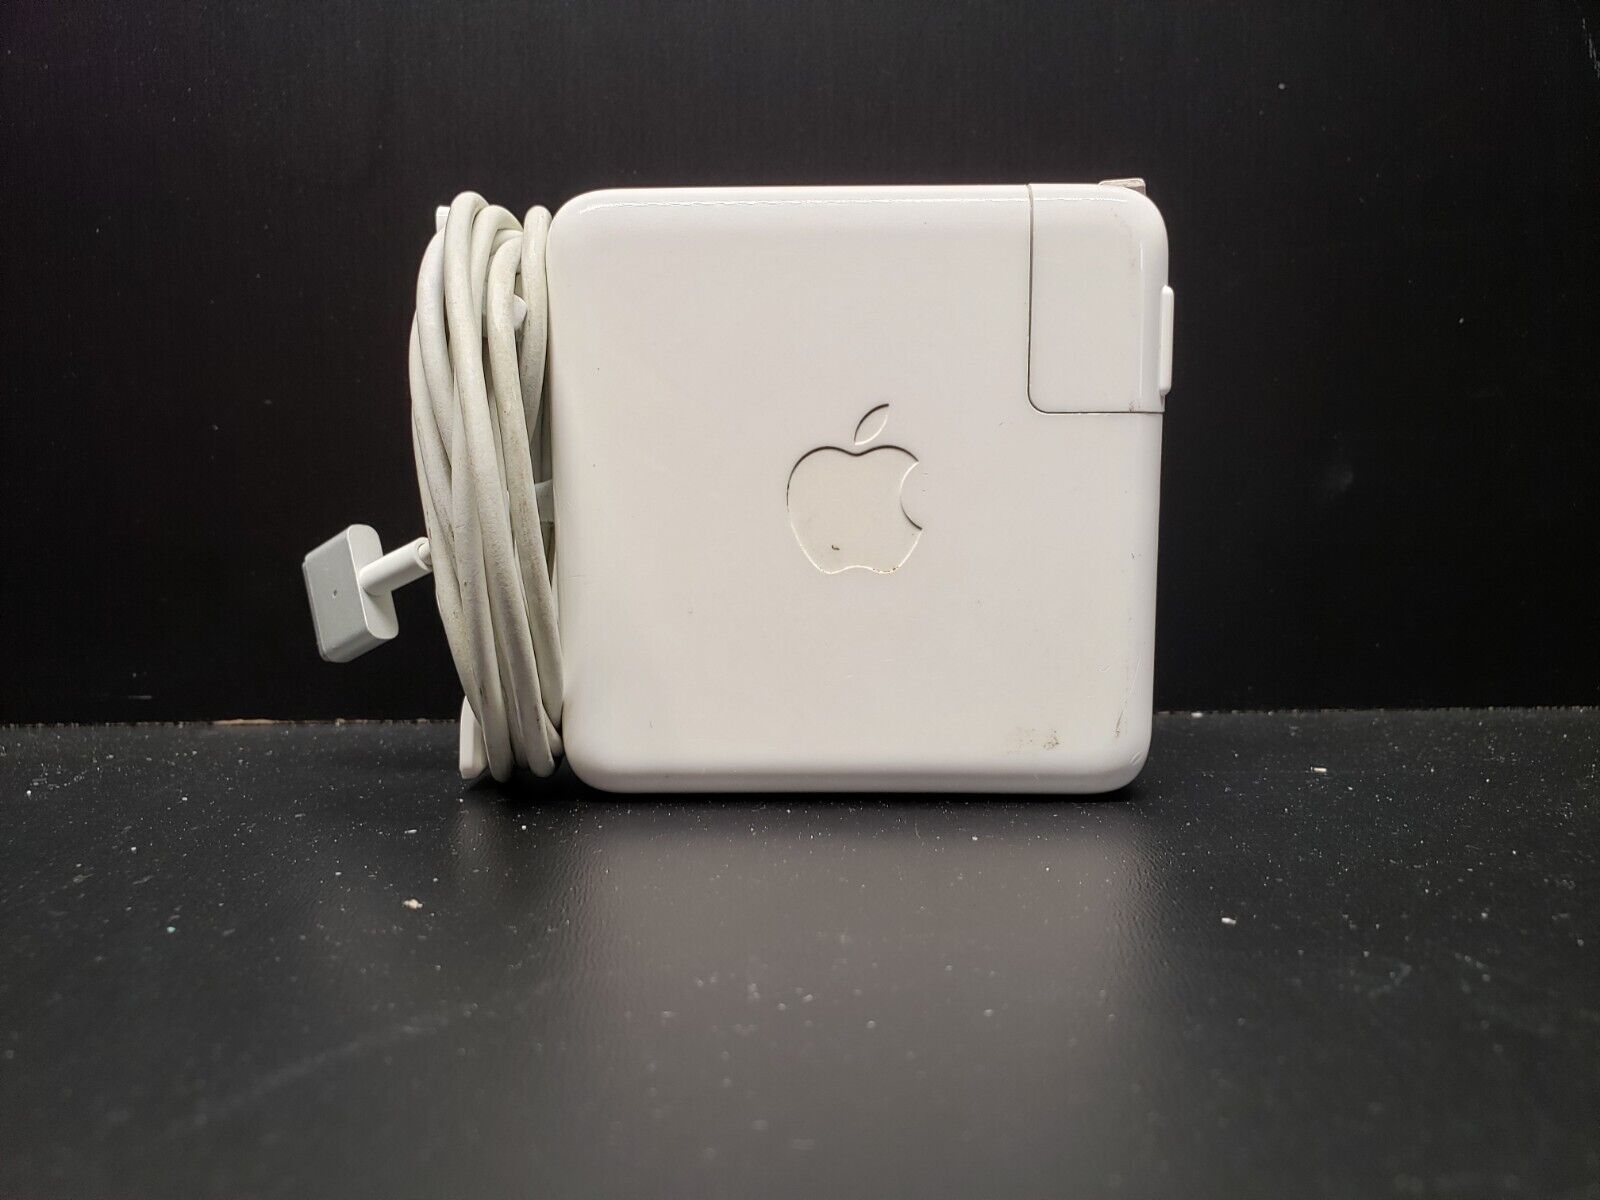 OEM MagSafe 2 Apple Charger For MacBook Pro Air 13 15 2014 2015 AC Power 85W